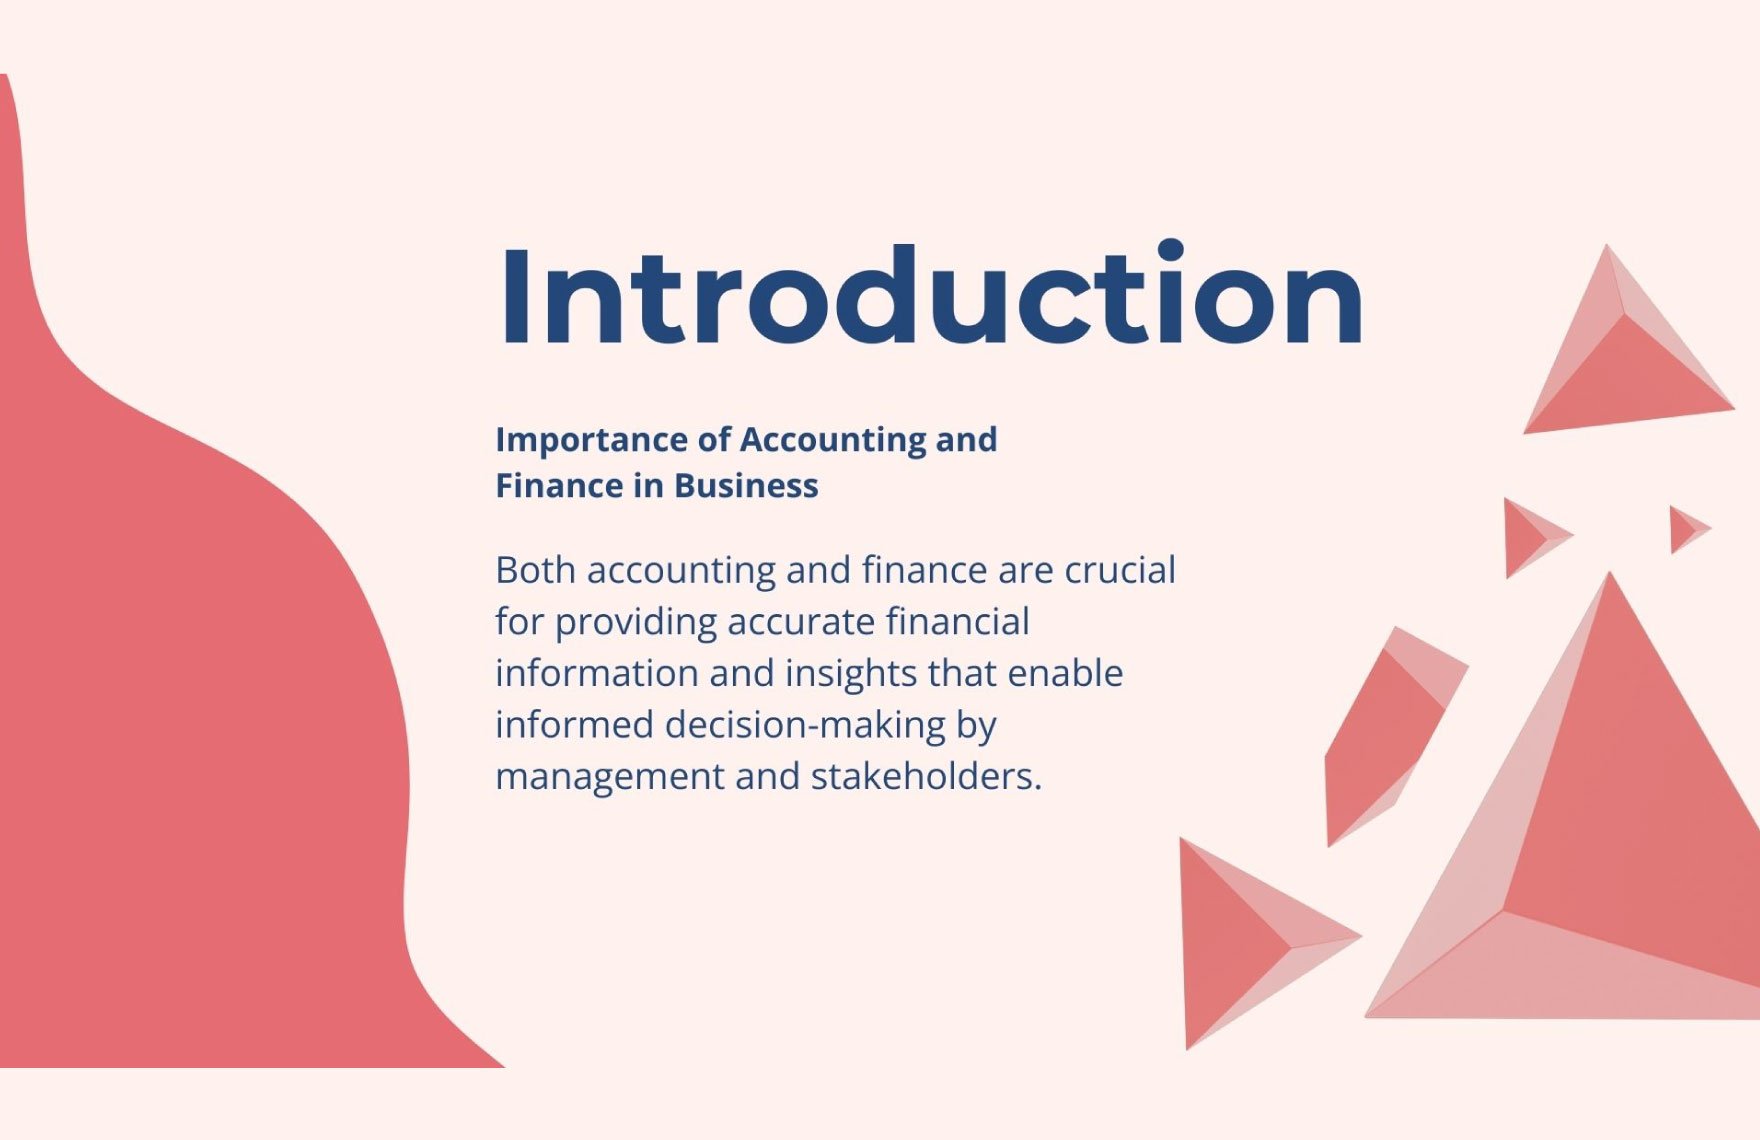 Accounting and Finance Template